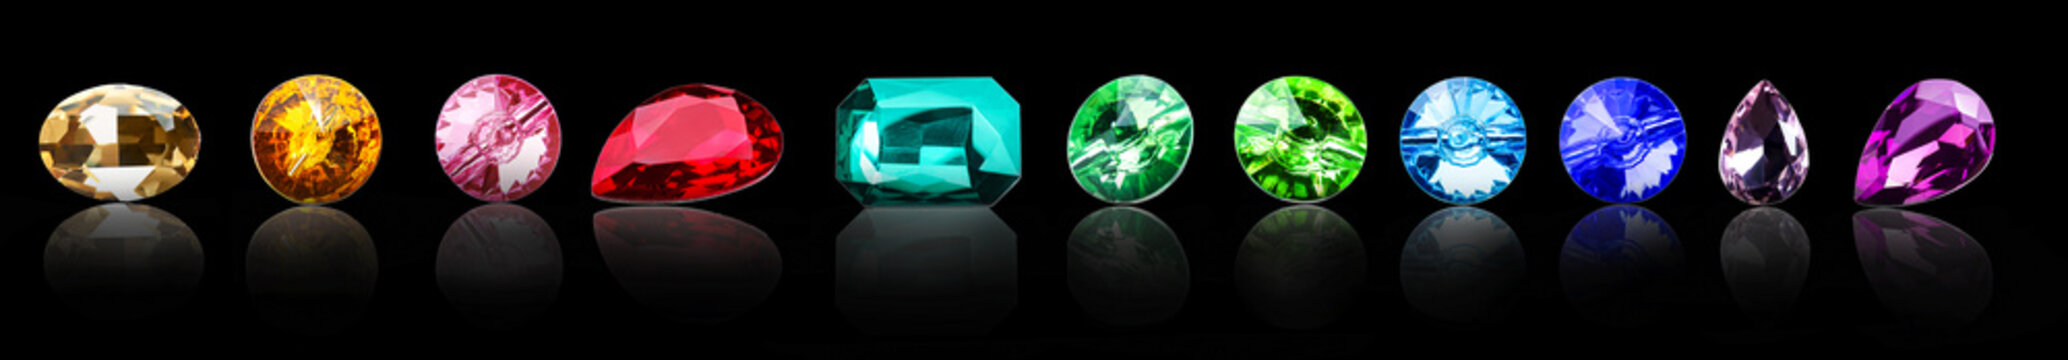 Different precious stones for jewellery on dark background